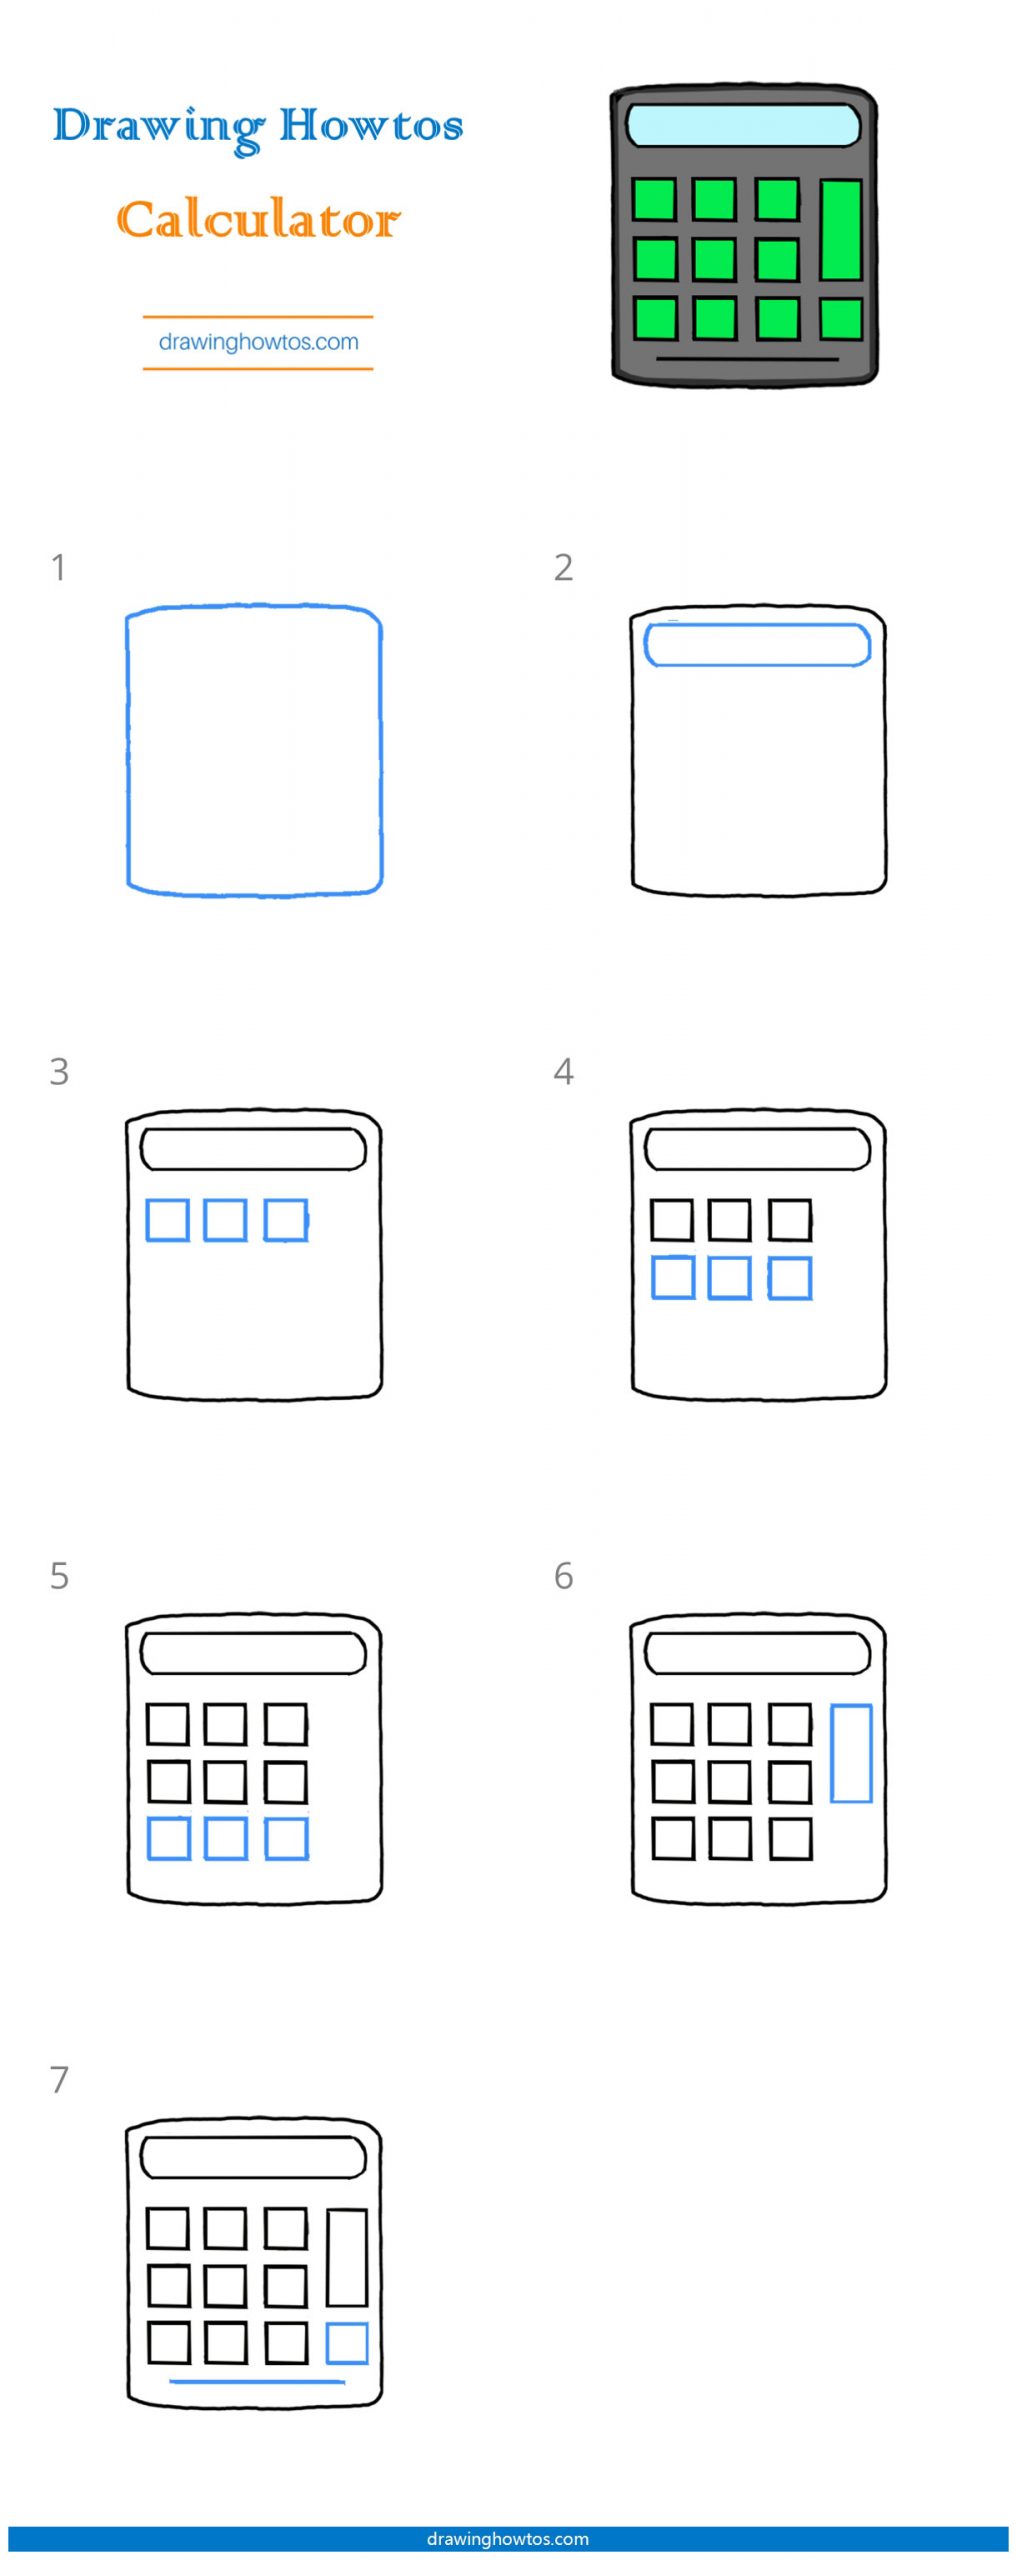 How to Draw a Calculator Step by Step